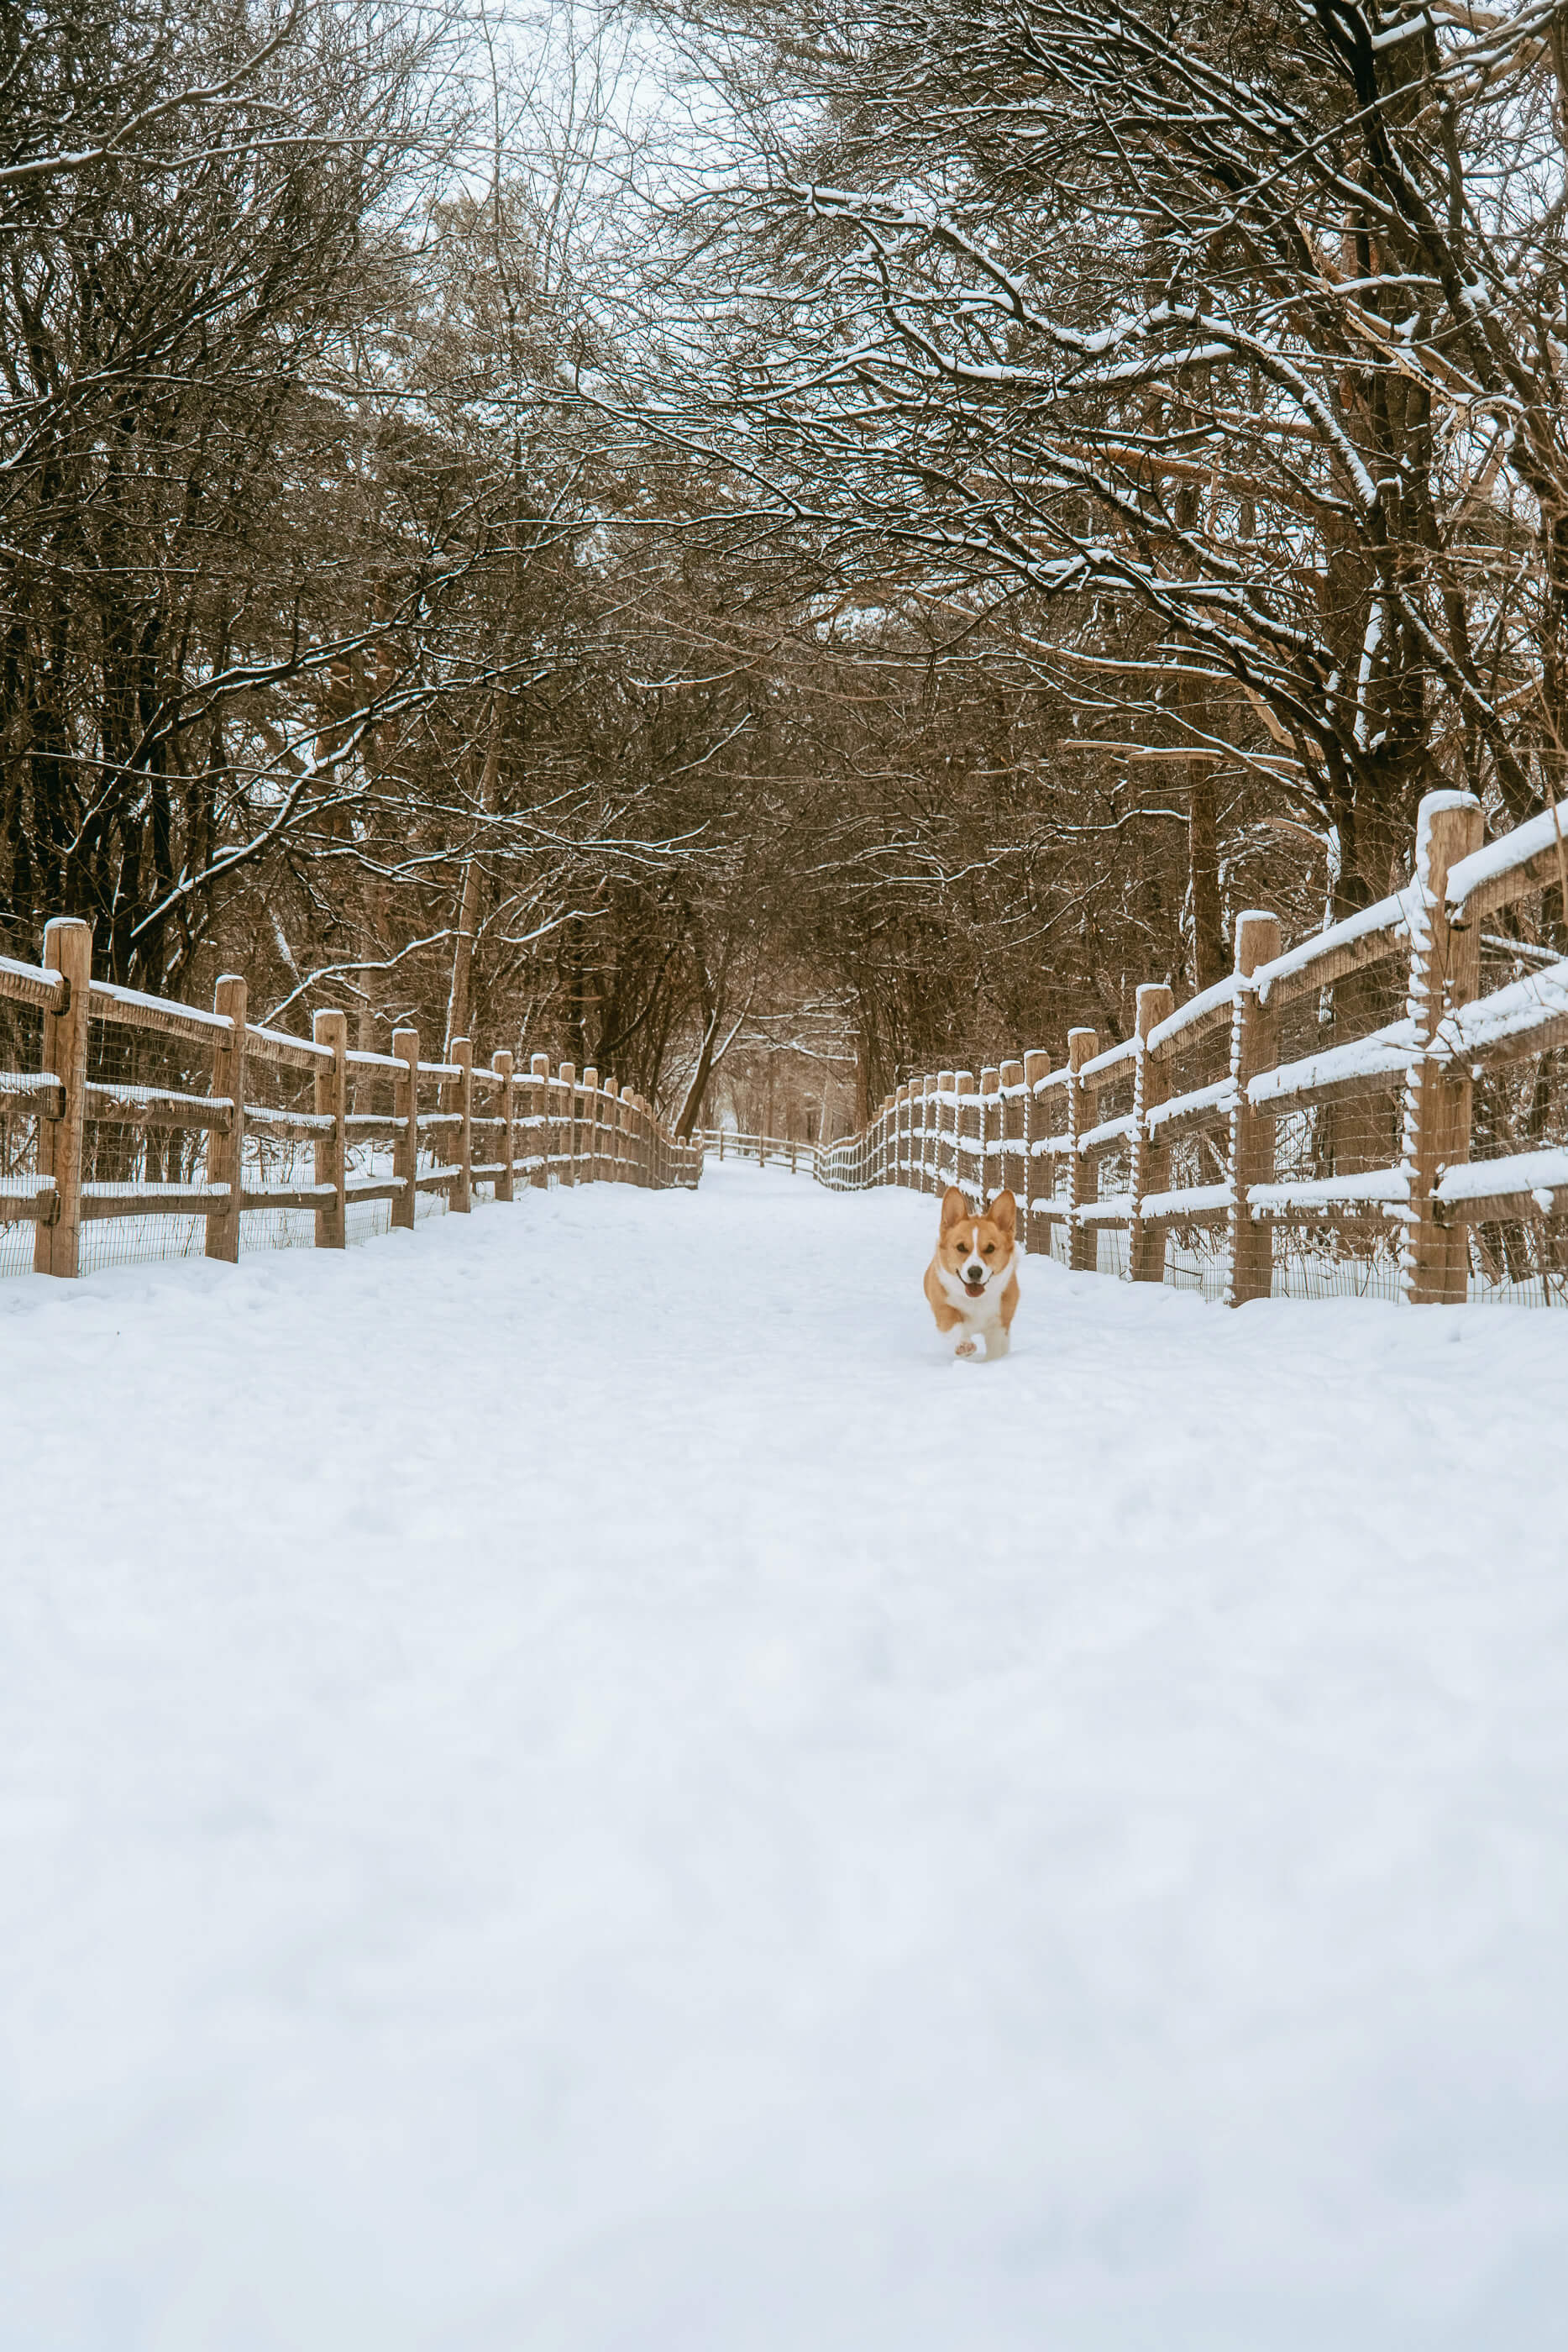 Red and white corgi running in the snow. She is running between two wooden fences in the off-leash area at the G. Ross Lord Dog Park